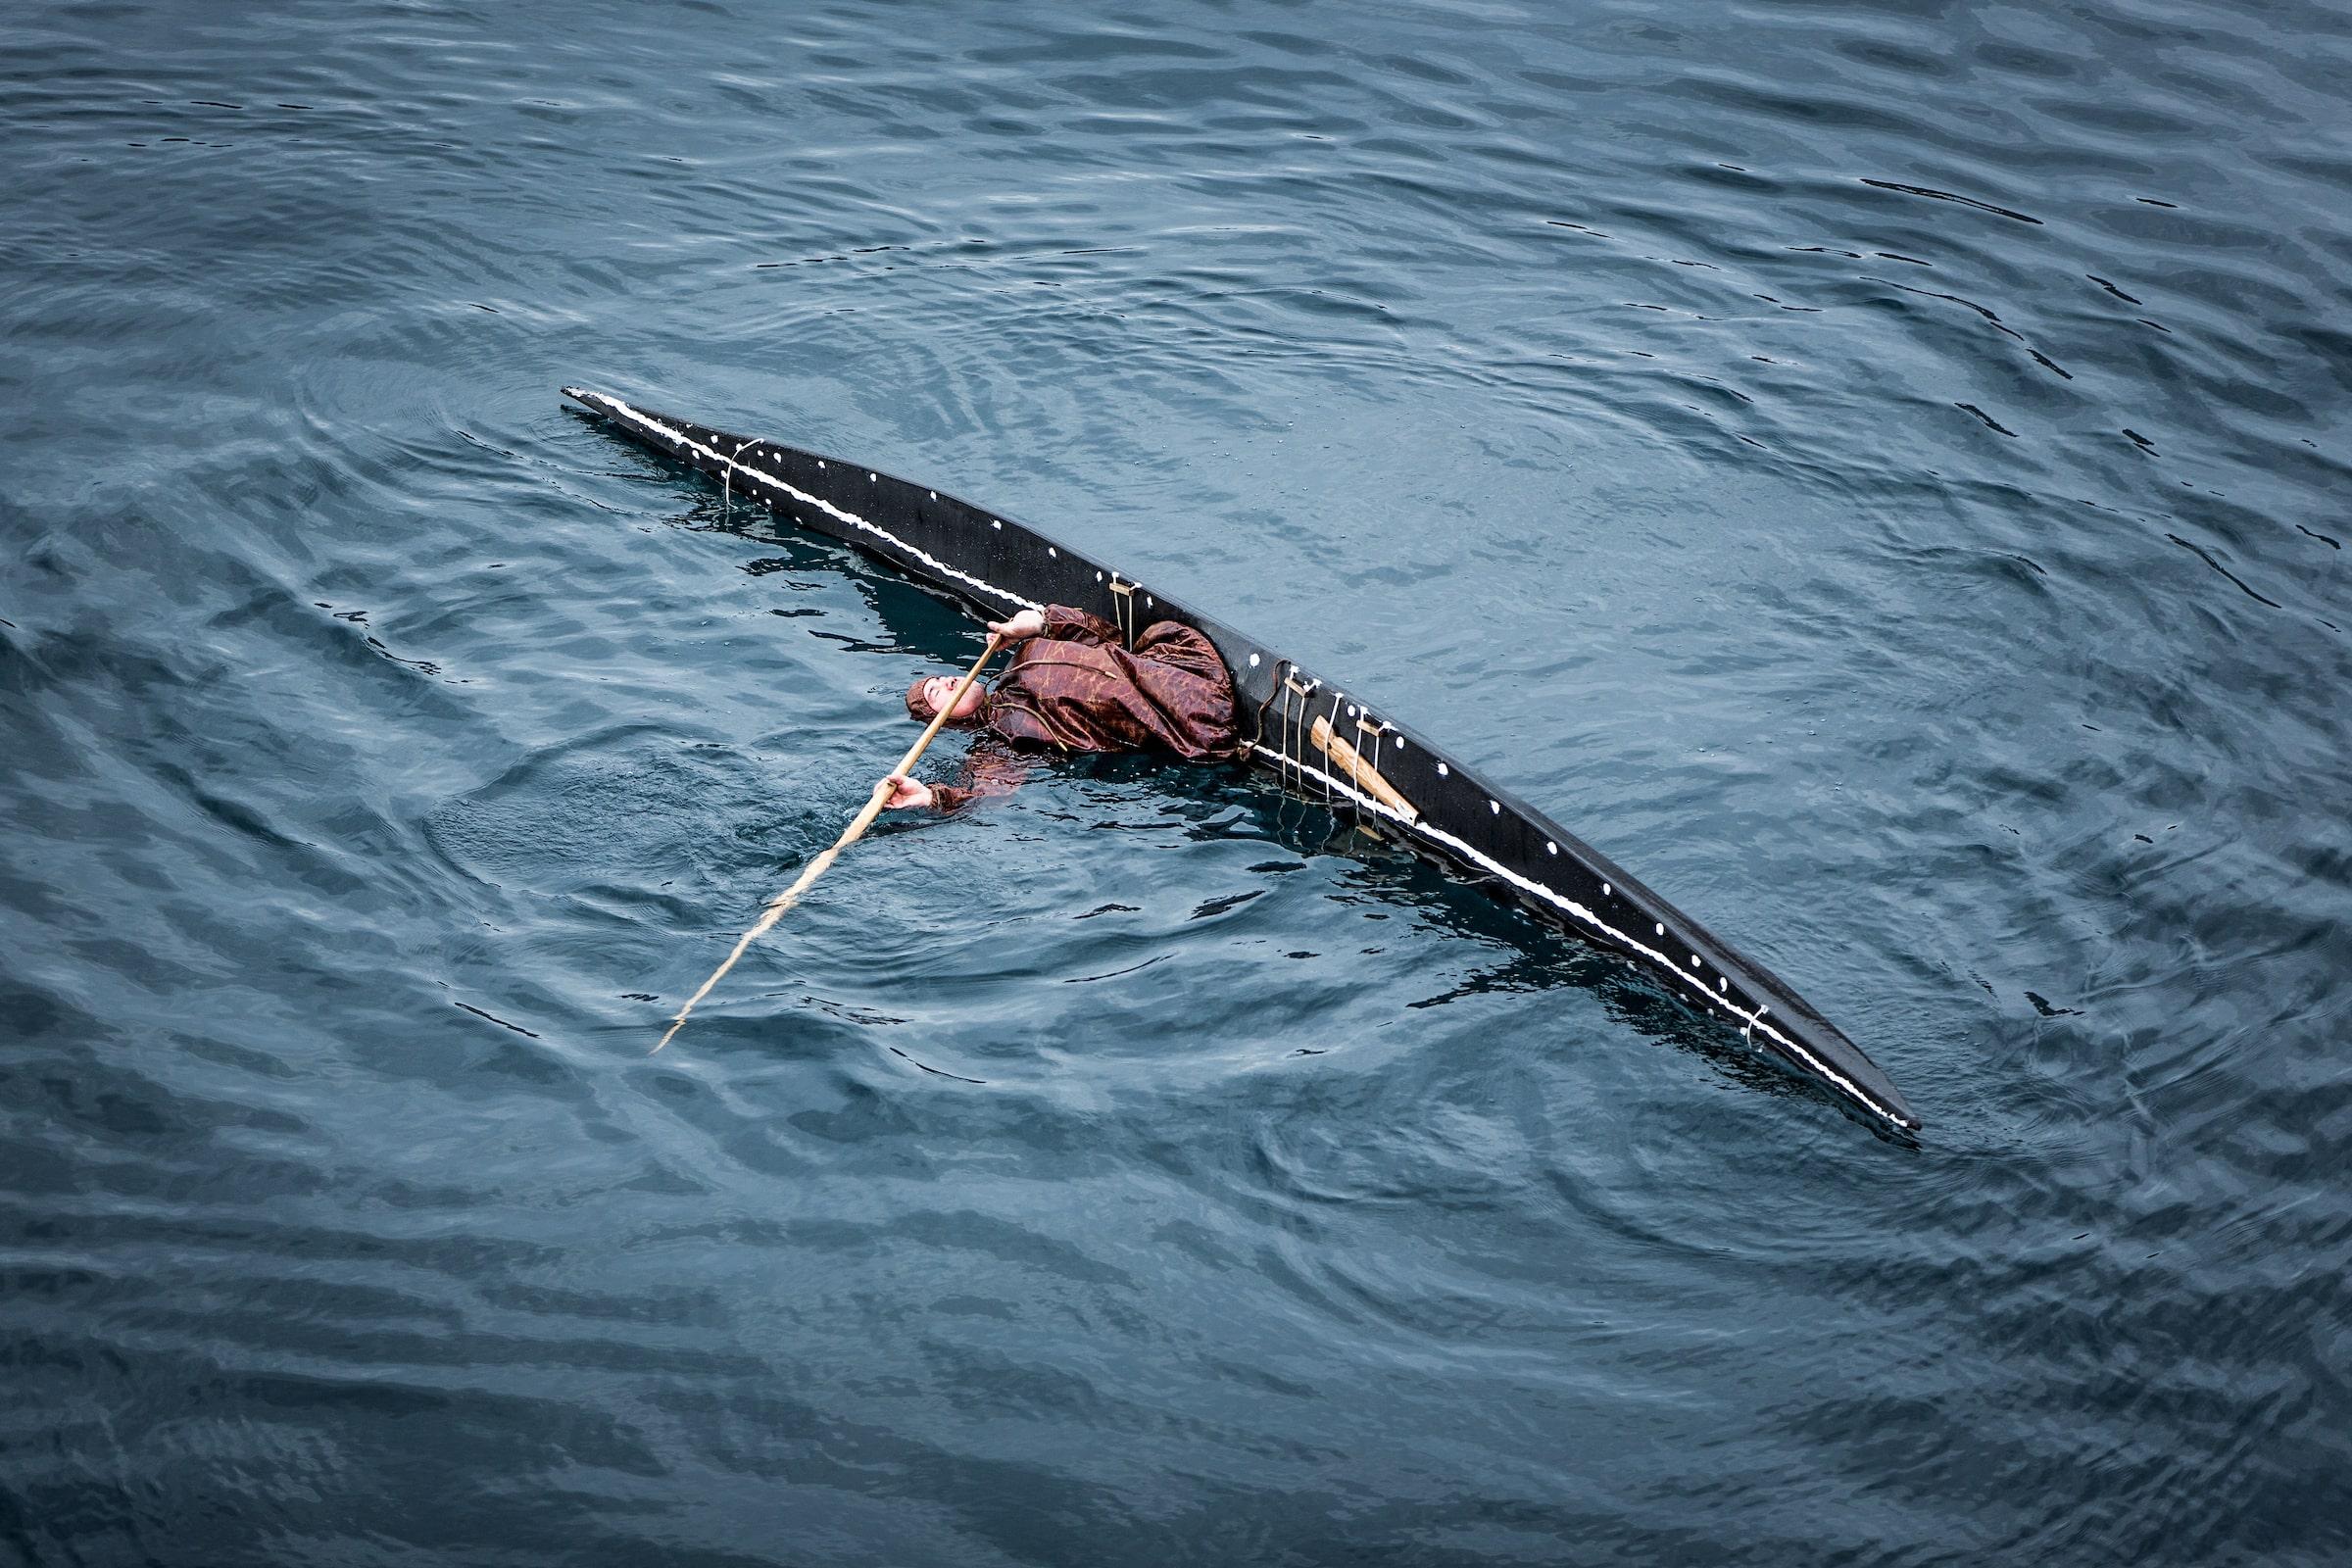 A Greenlandic kayaker from Sisimiut performaing a roll in a traditional kayak. Photo by Mads Pihl